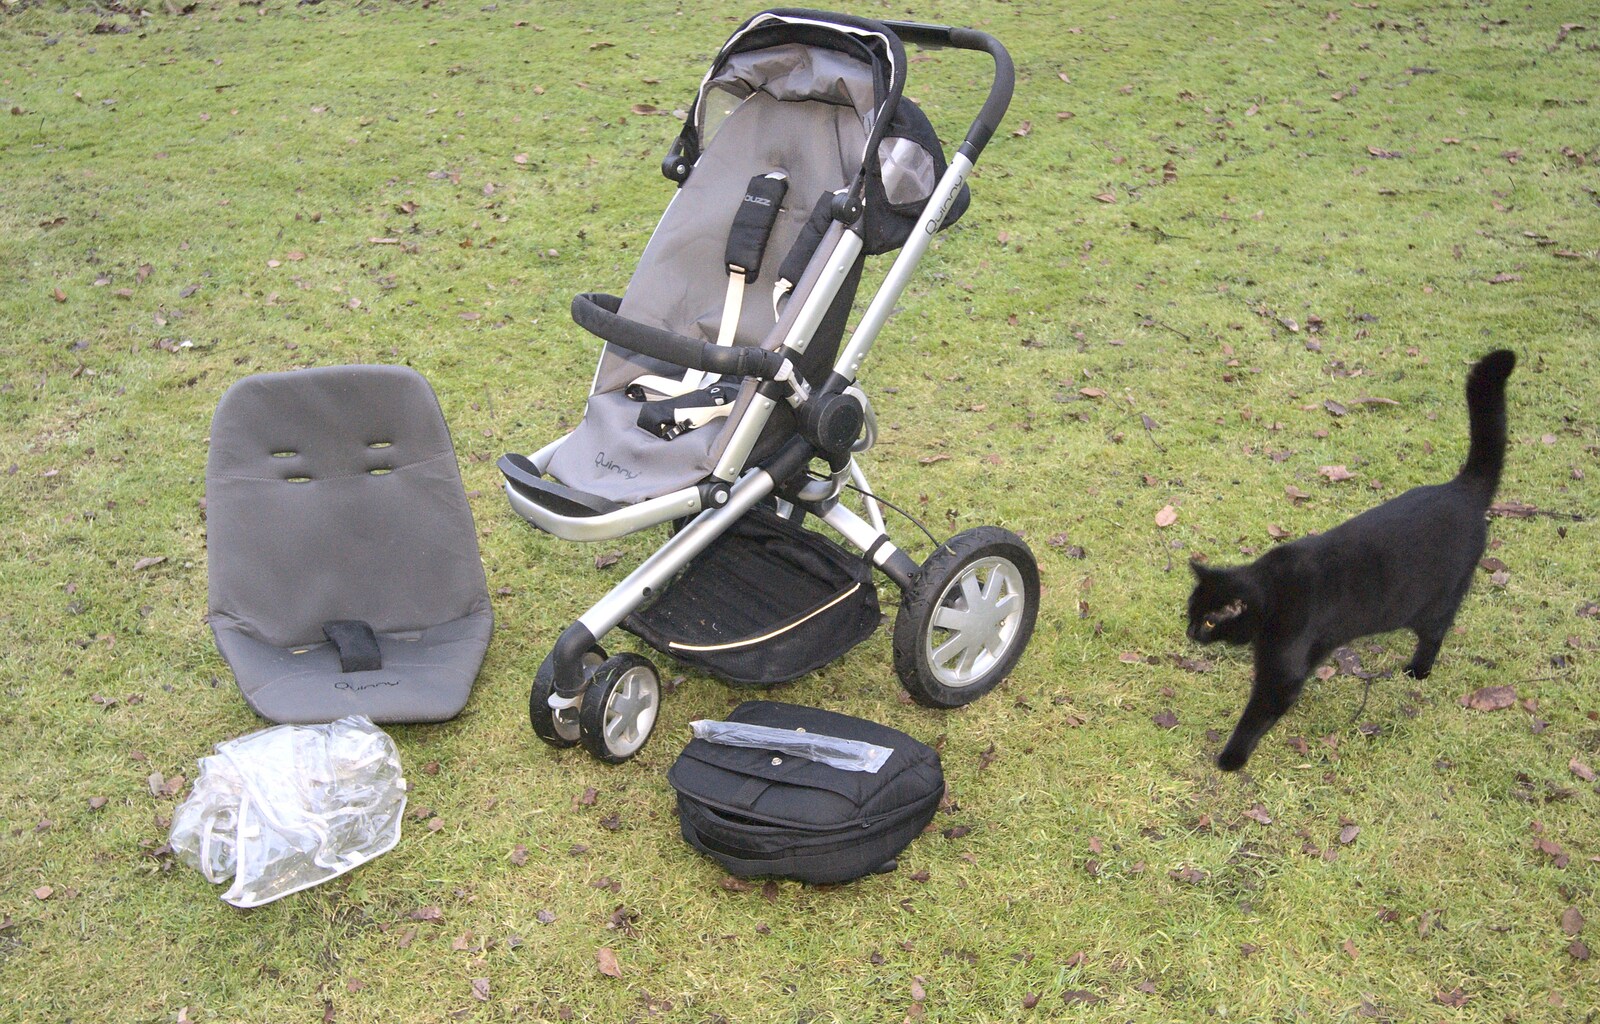 New Year's Day, and The Miserable Rich at the Arts Centre, Southwold and Norwich - 1st January 2011: Millie inspects the buggy on the lawn